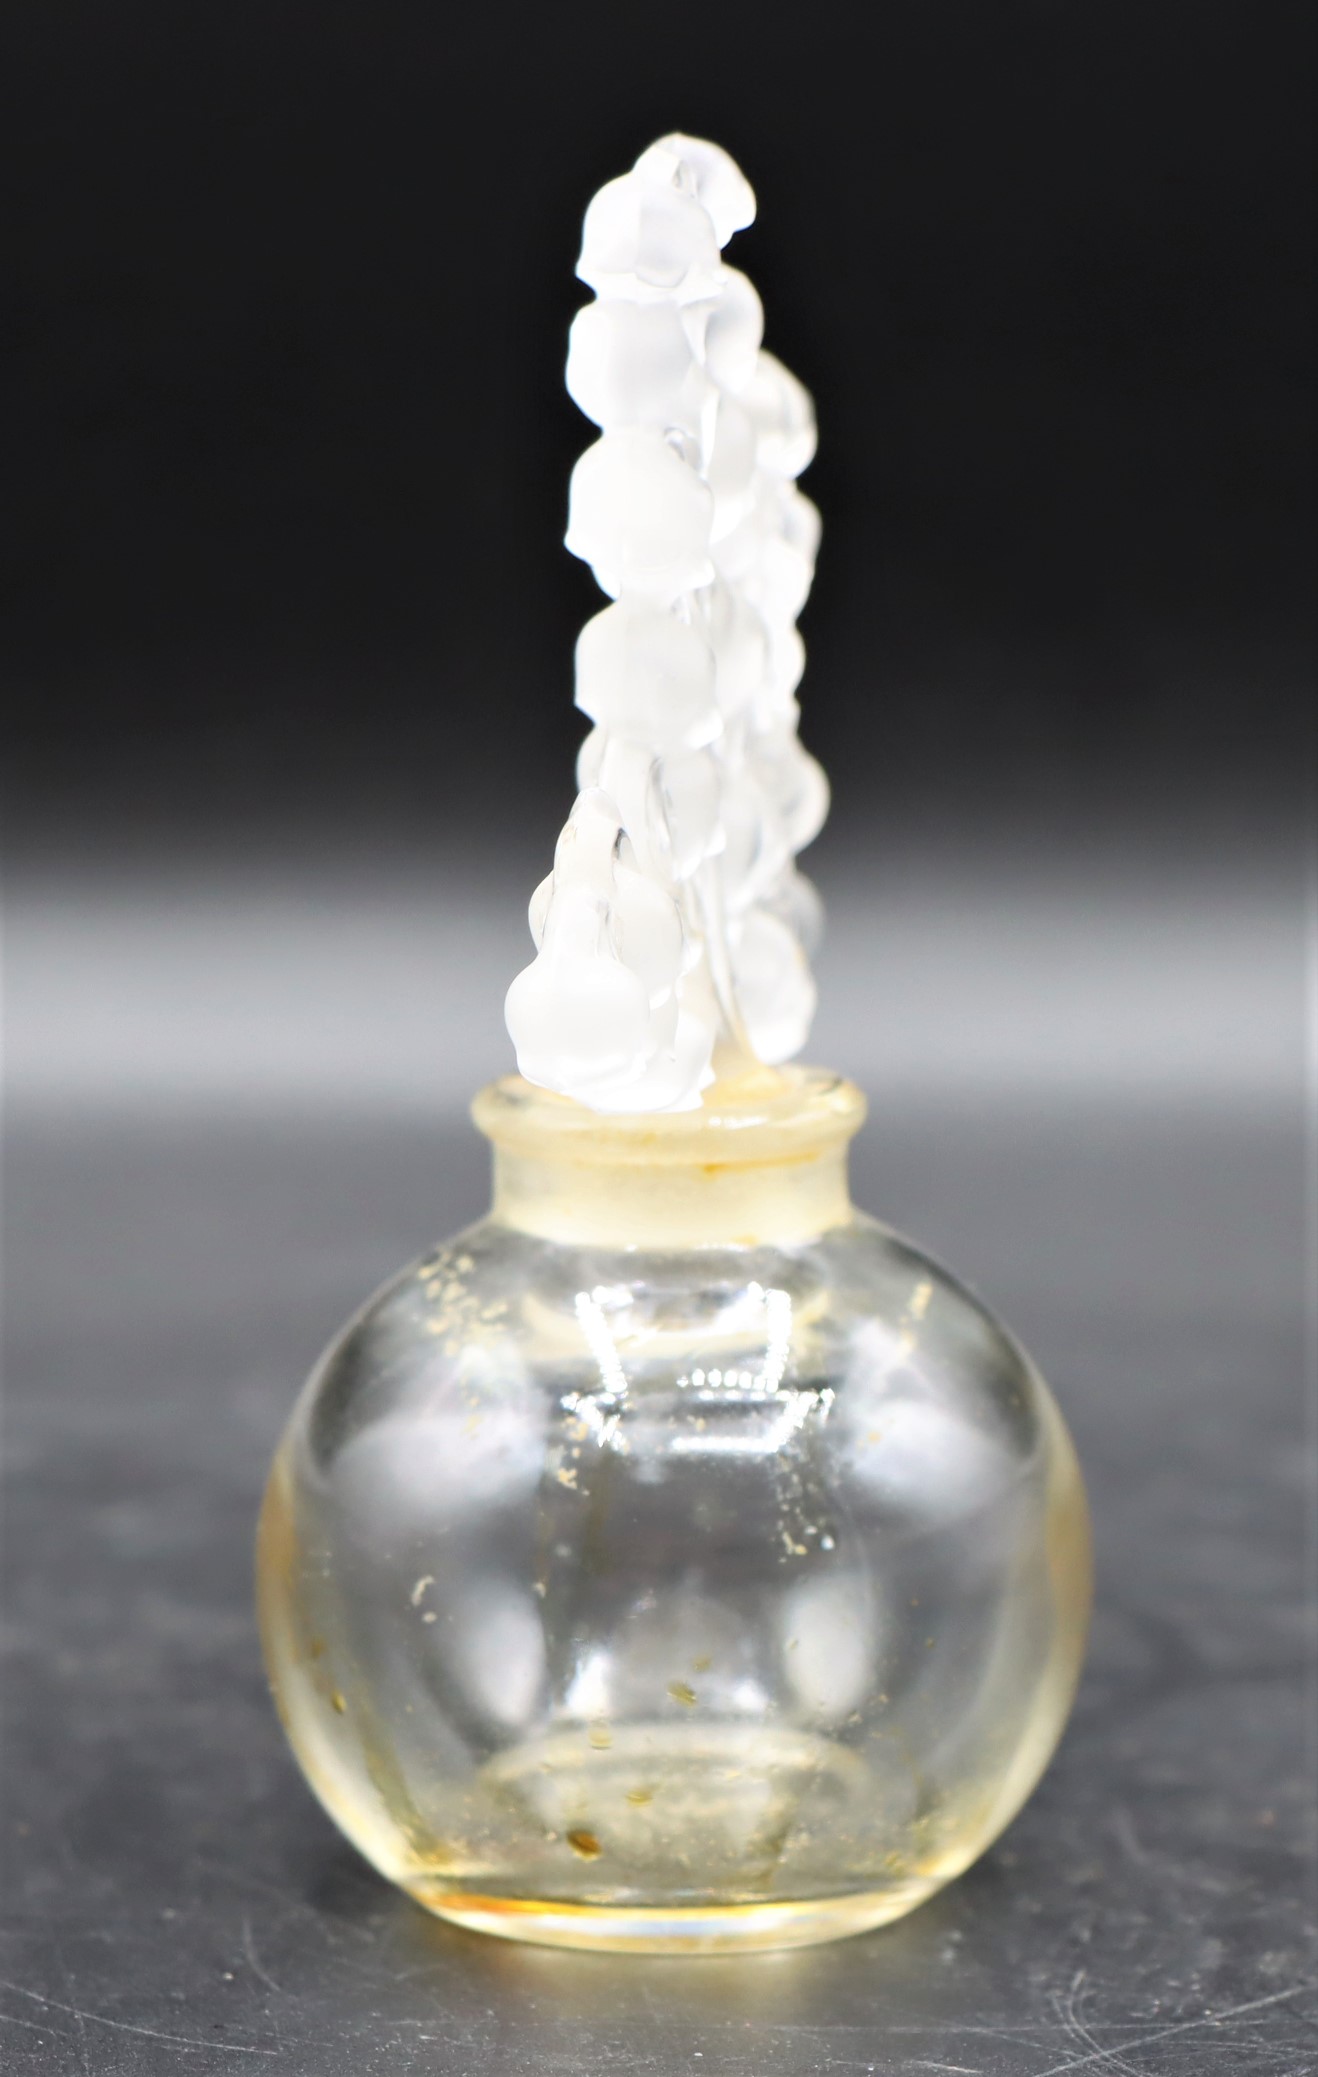 Lalique Crystal Perfume Bottle, Lily of the Valley - Image 2 of 4